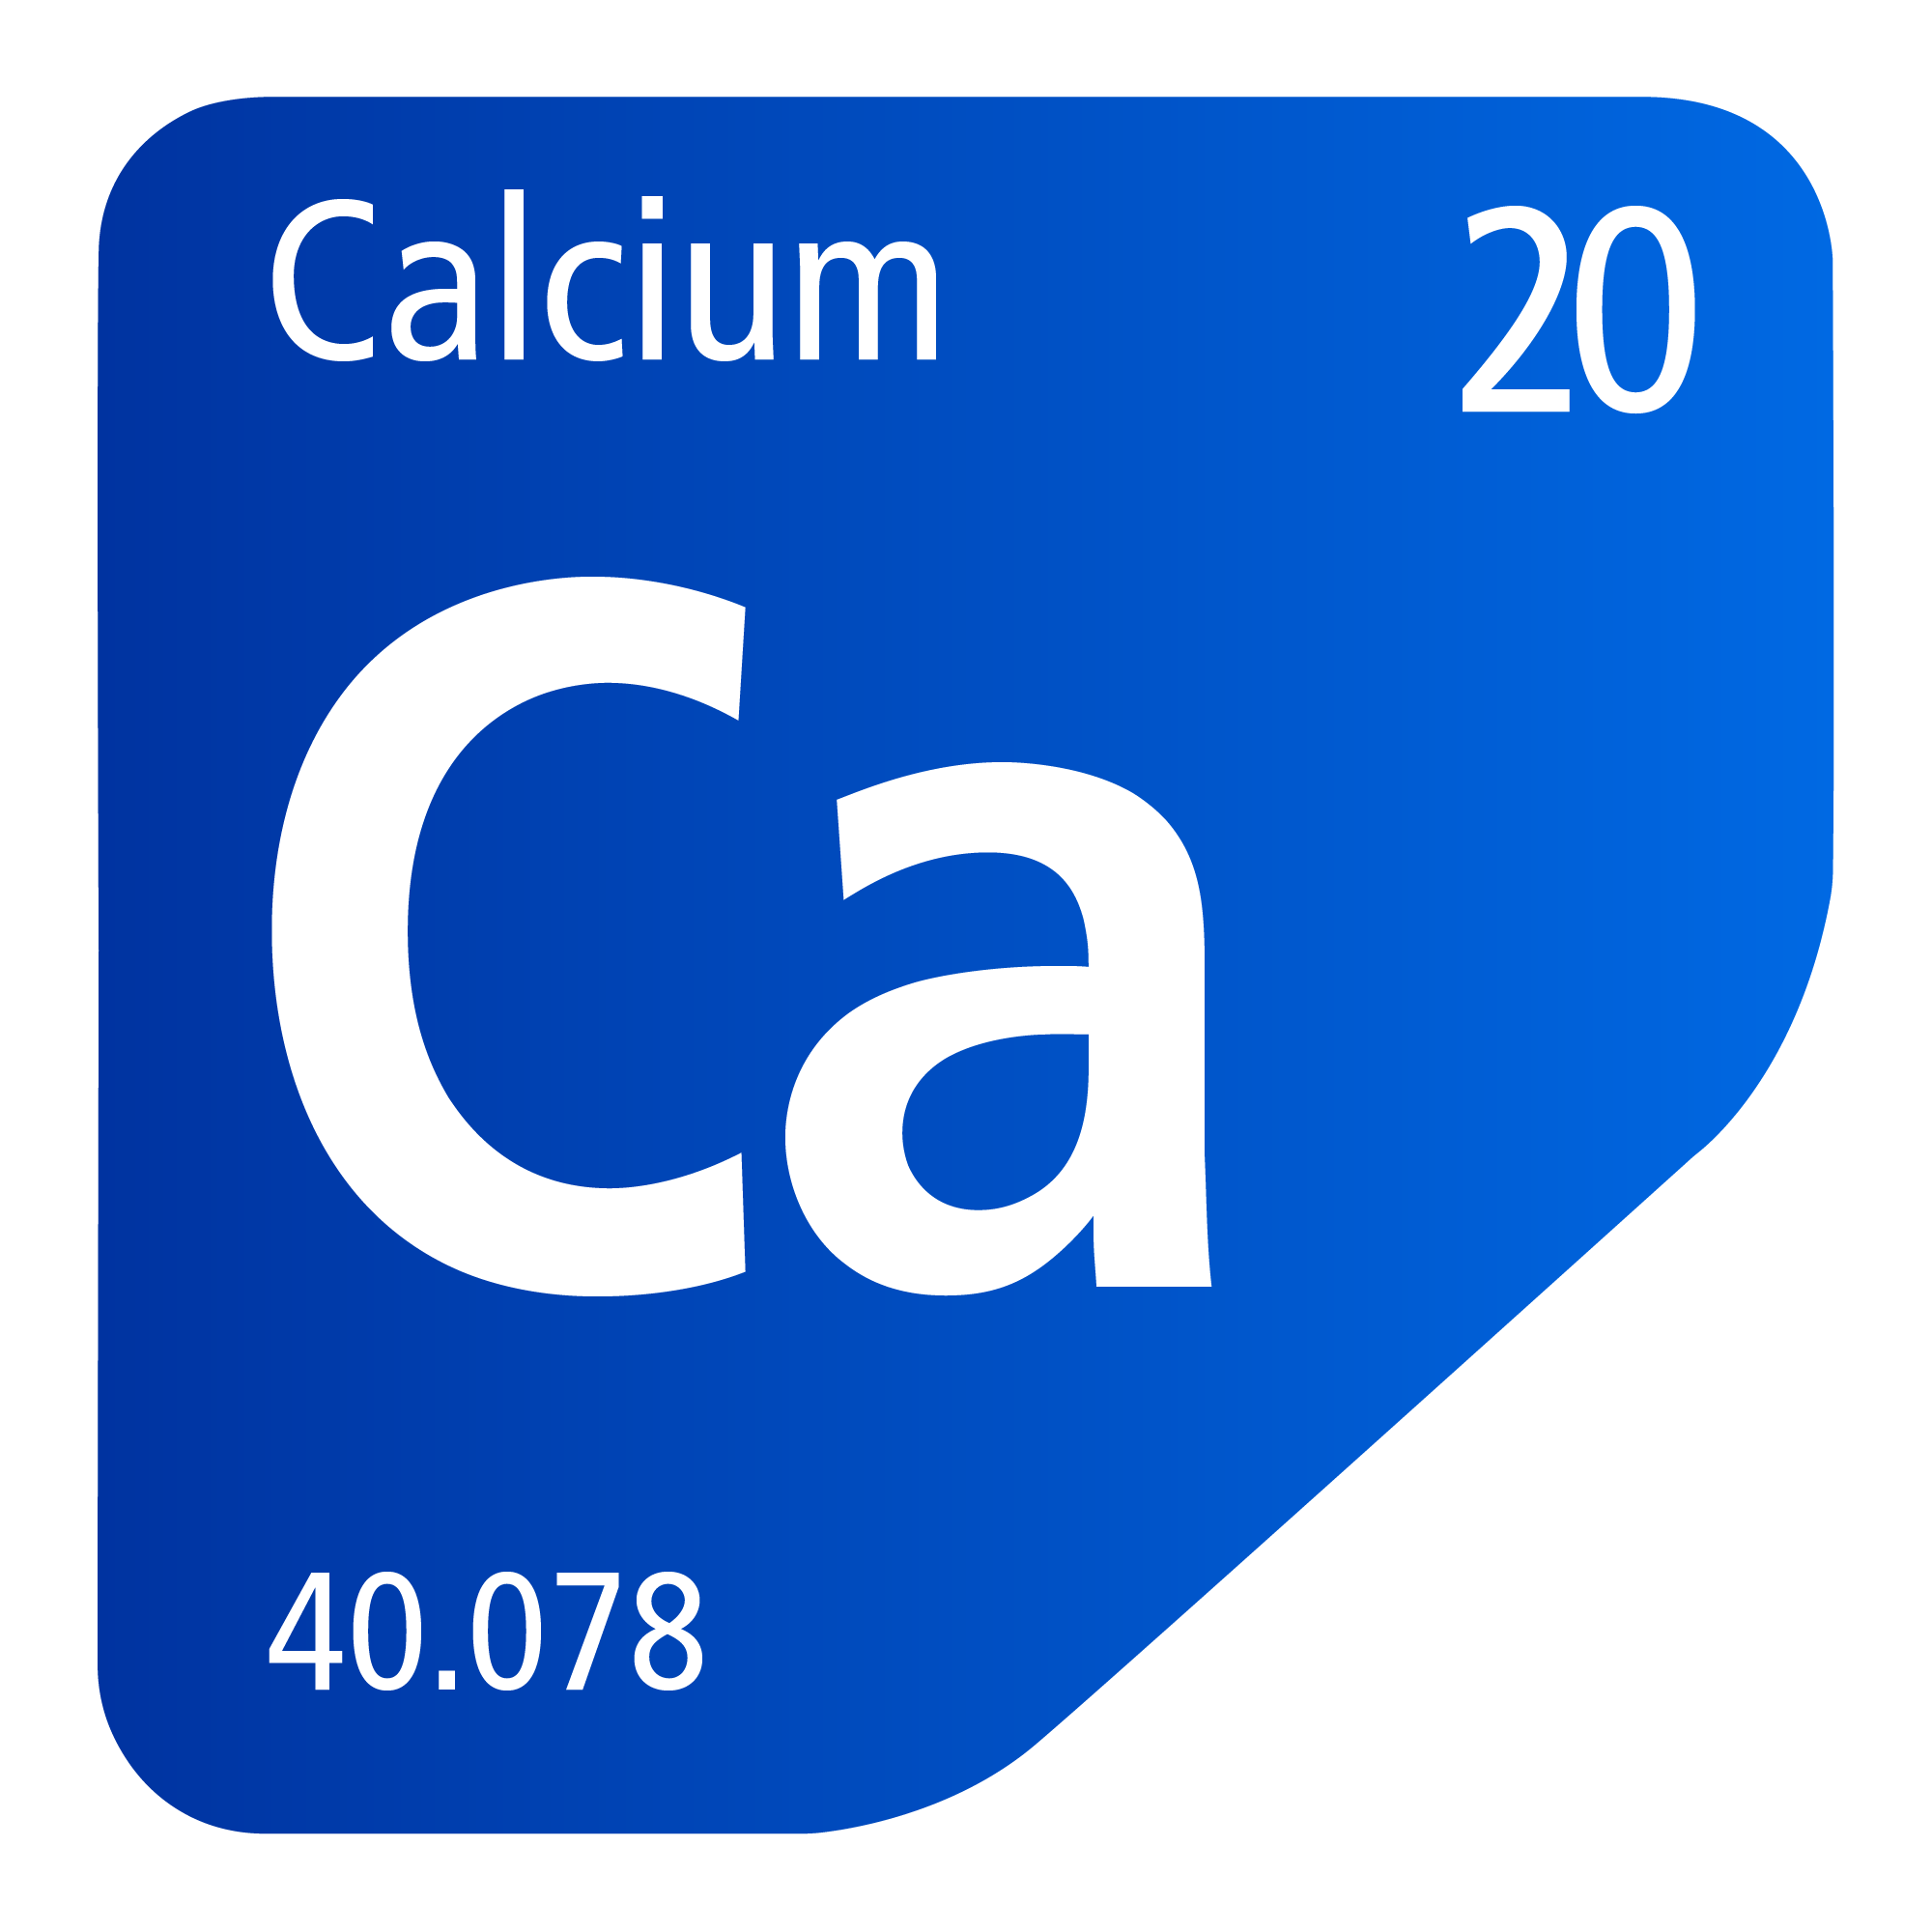 List of Behansar products in Calcium category